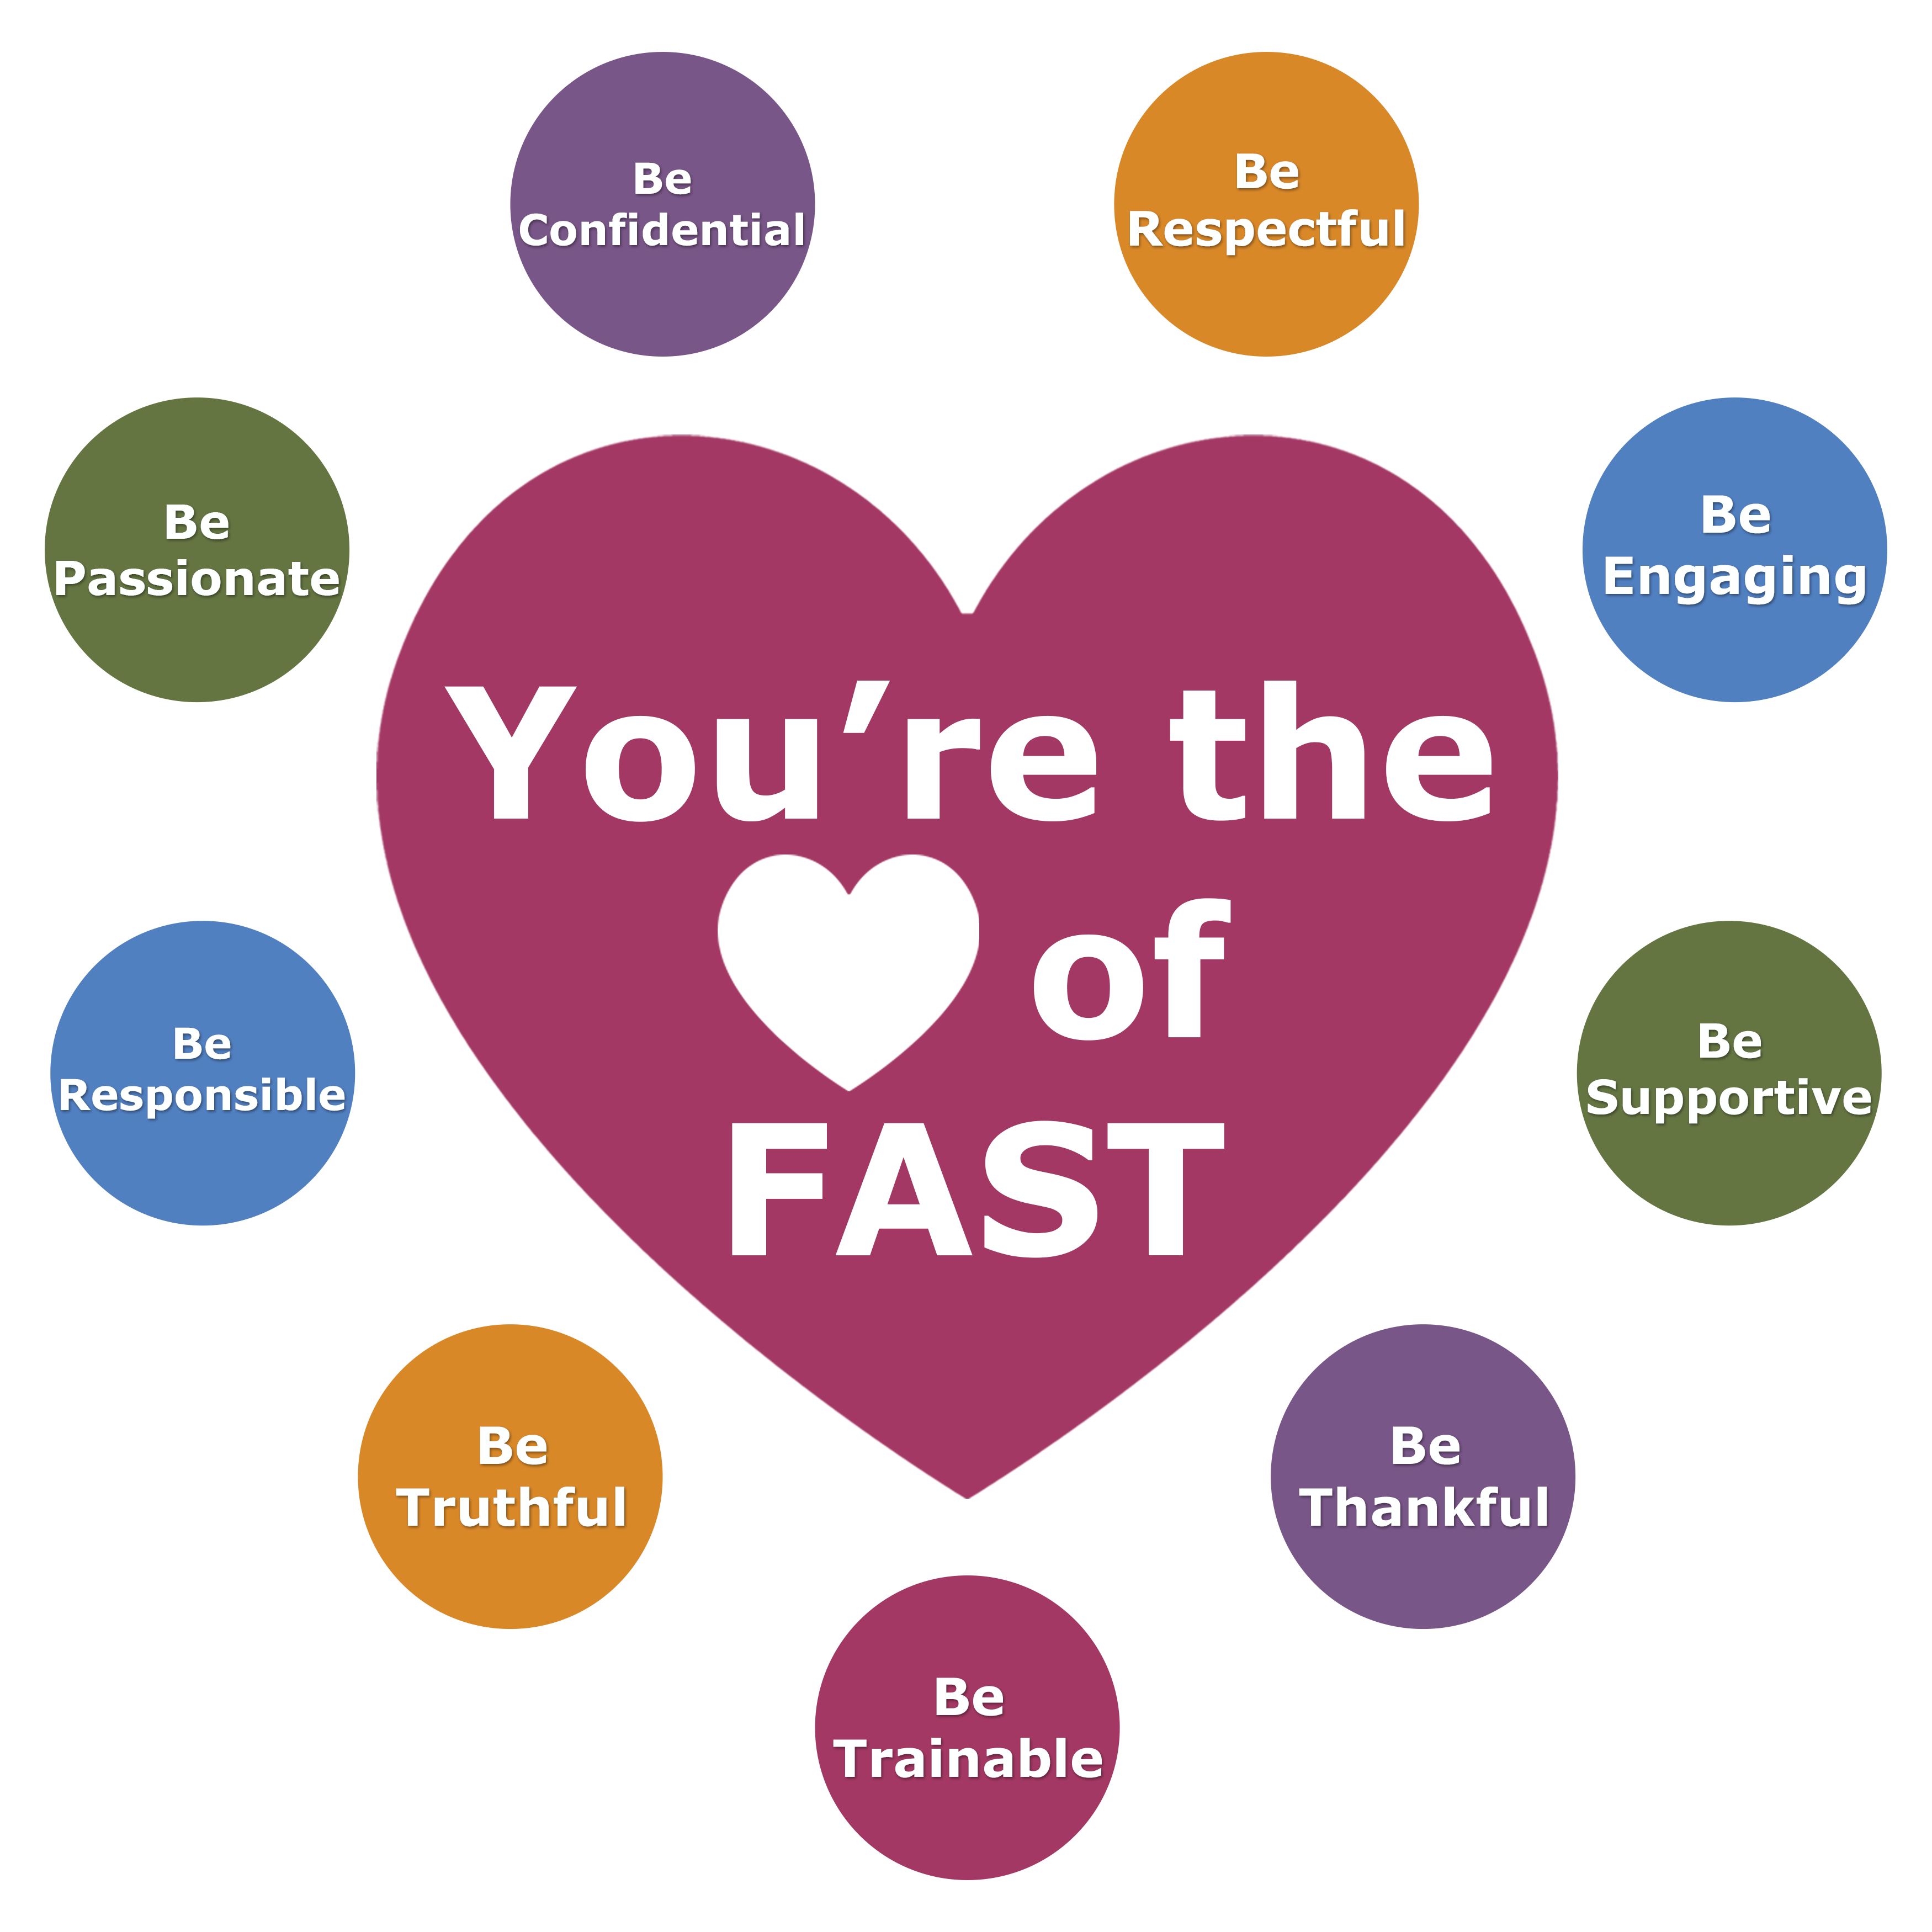 You're the heart of FAST. Be Respectful, Be Engaging, Be Supportive, Be Thankful, Be Trainable, Be Truthful, Be Responsible, Be Passionate, Be Confidential